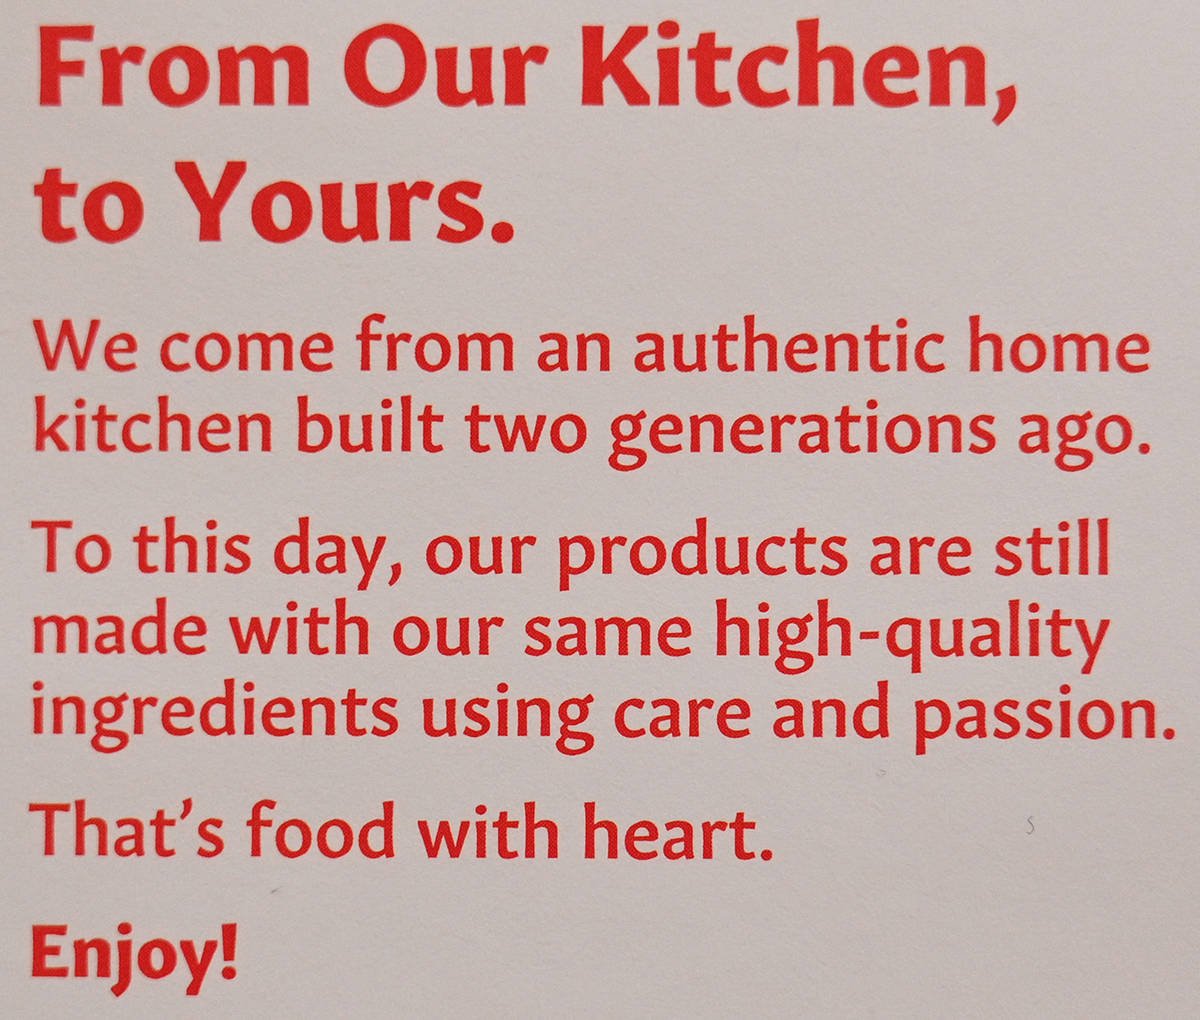 Image of the company description from the back of the box.